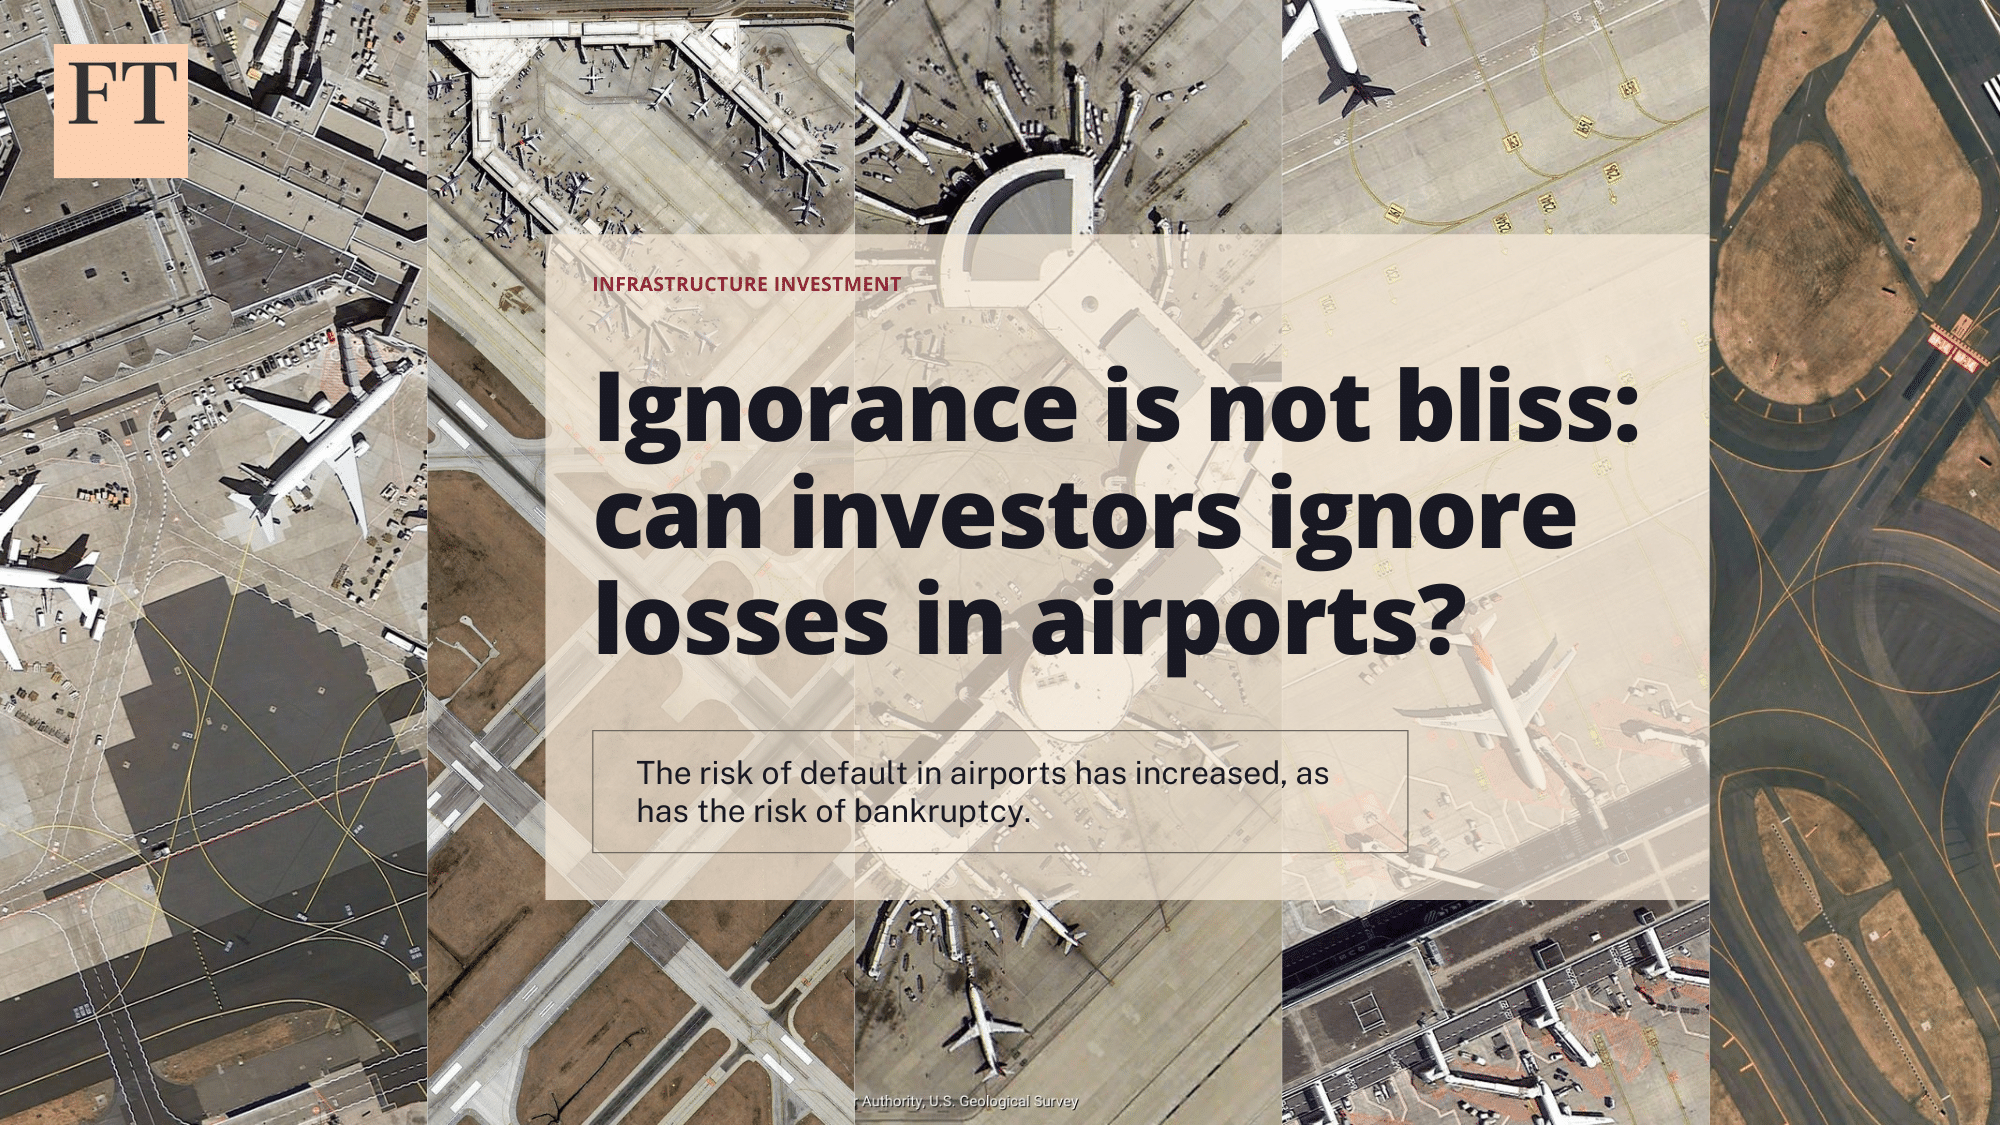 Featured image for “FT: Ignorance is not bliss: can investors ignore losses in airports?”